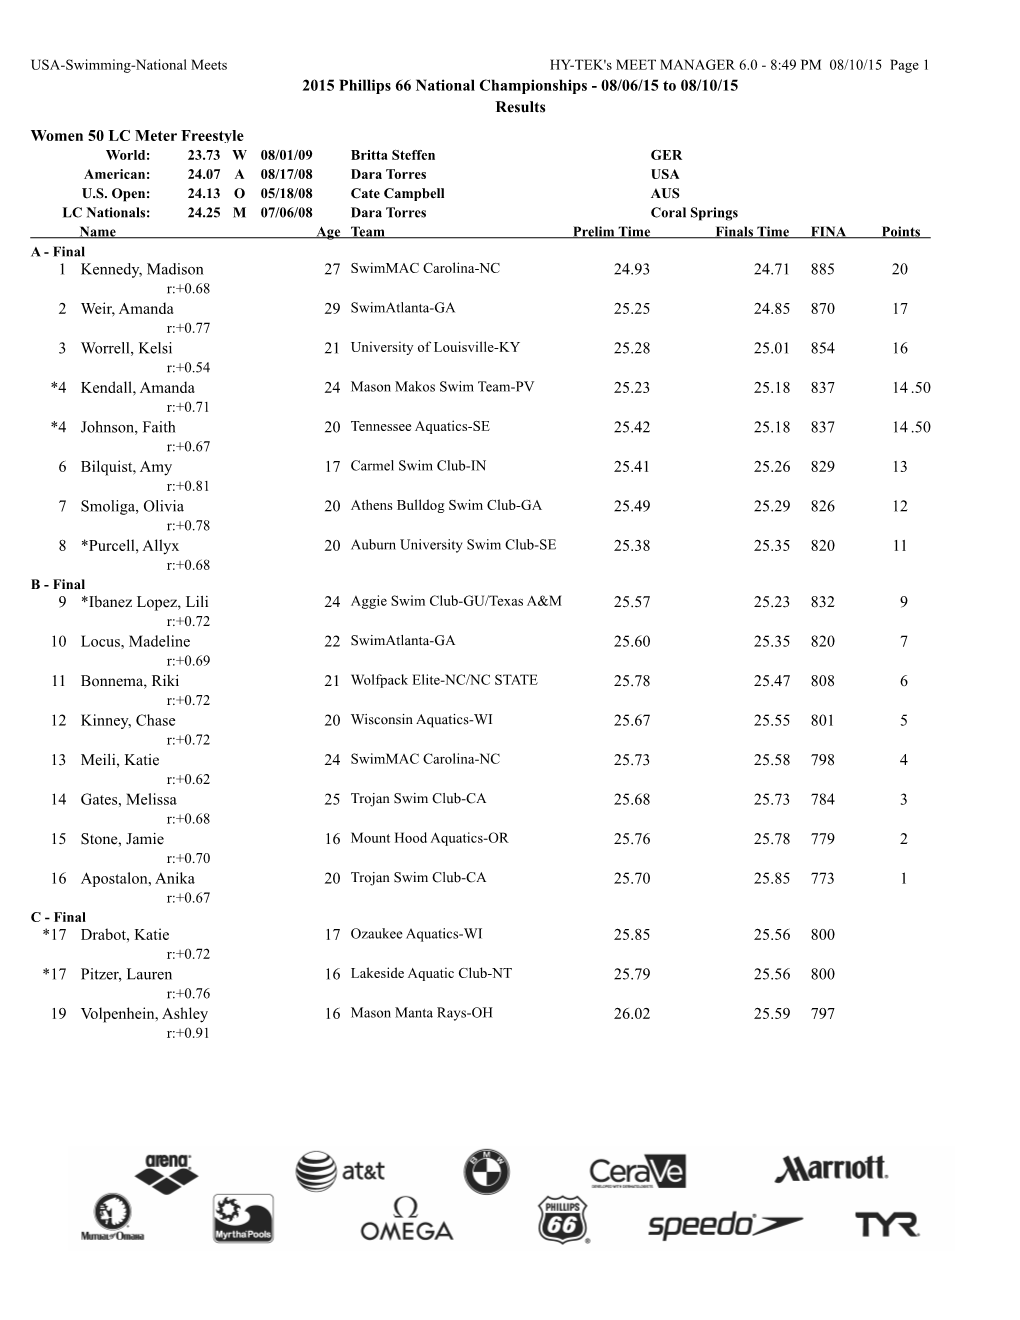 2015 Phillips 66 National Championships - 08/06/15 to 08/10/15 Results